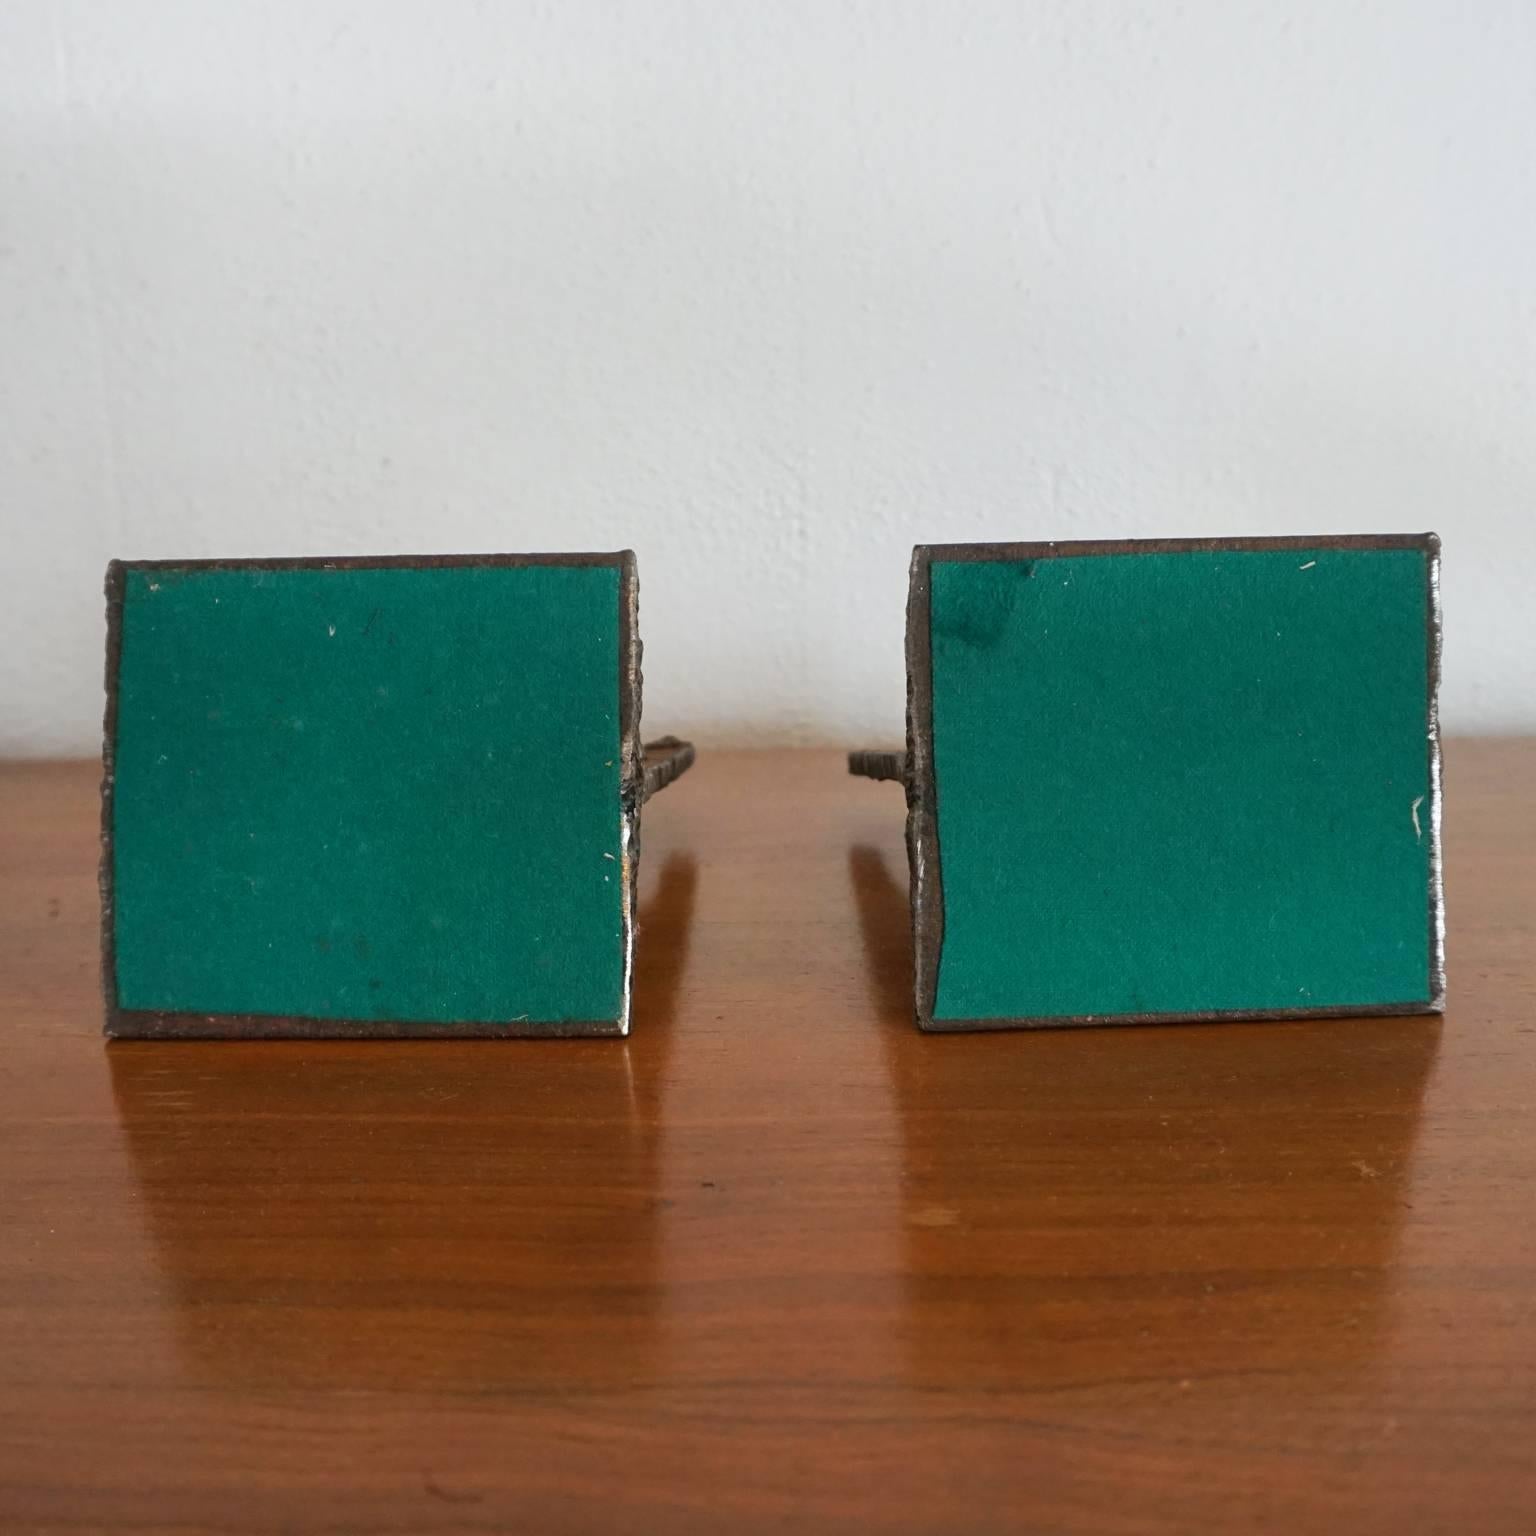 Welded 1960s Brutalist Torch Cut Bookends